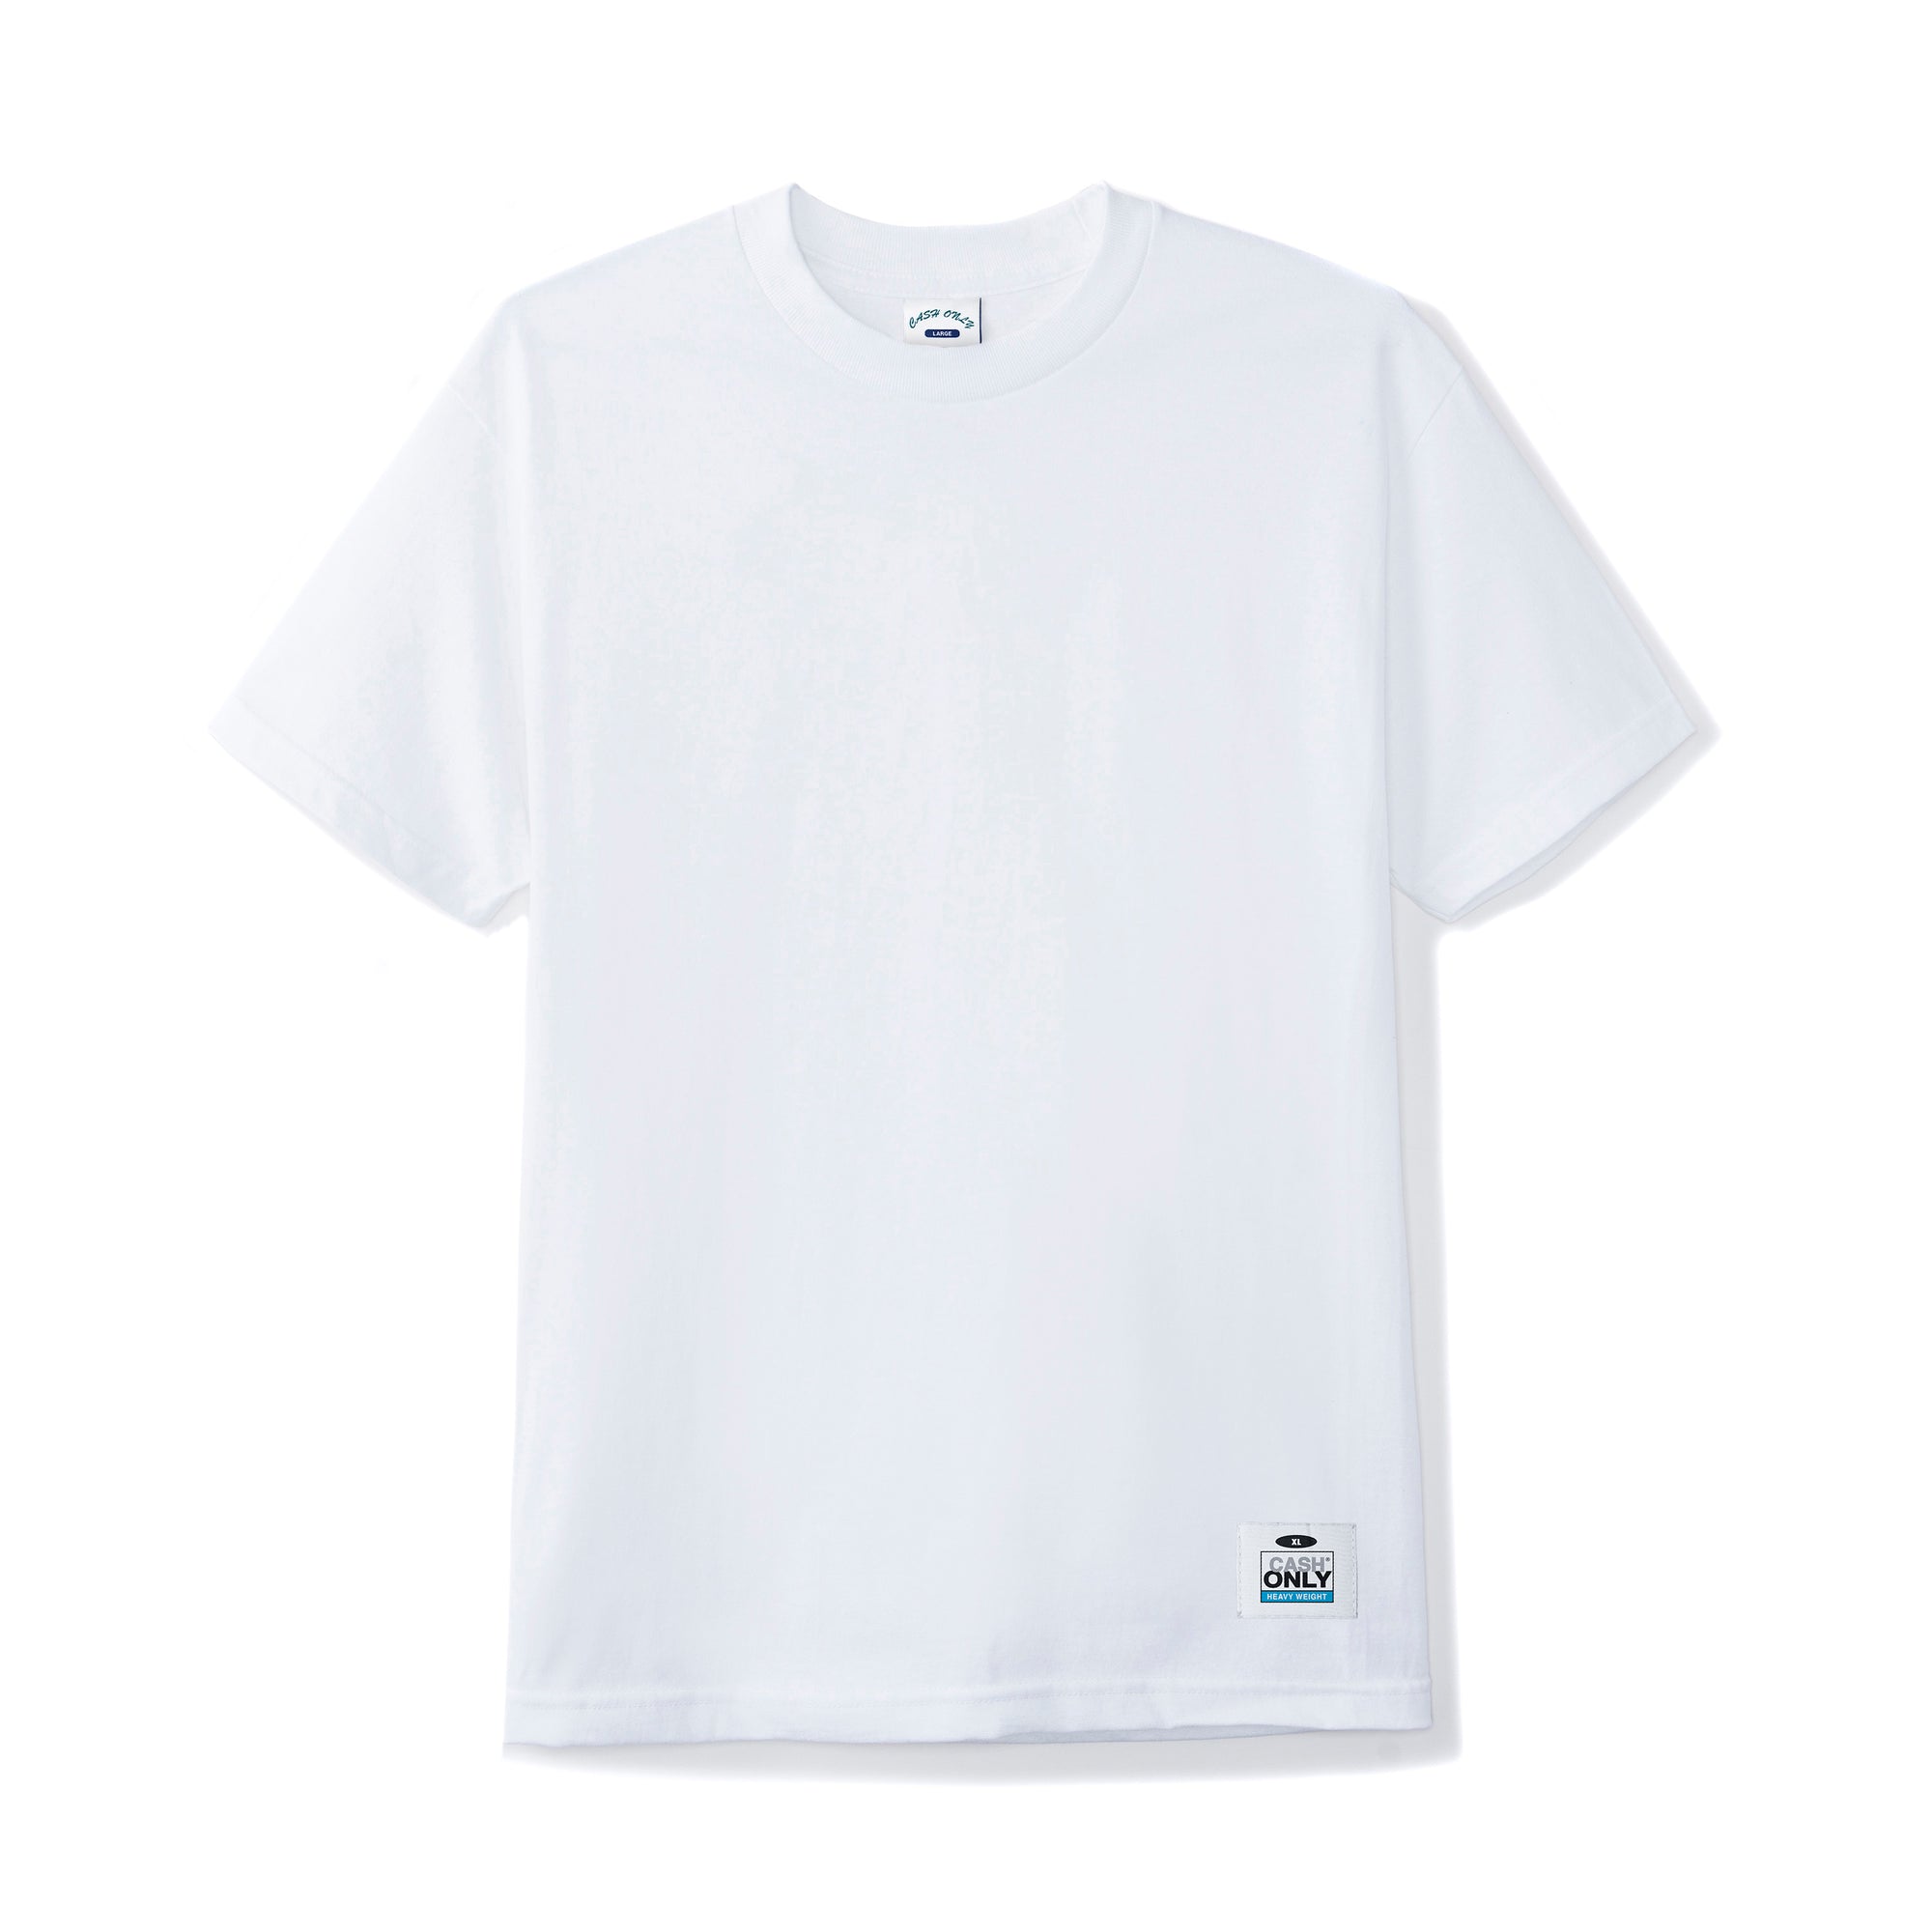 Cash Only Ultra Heavy-Weight Tee White